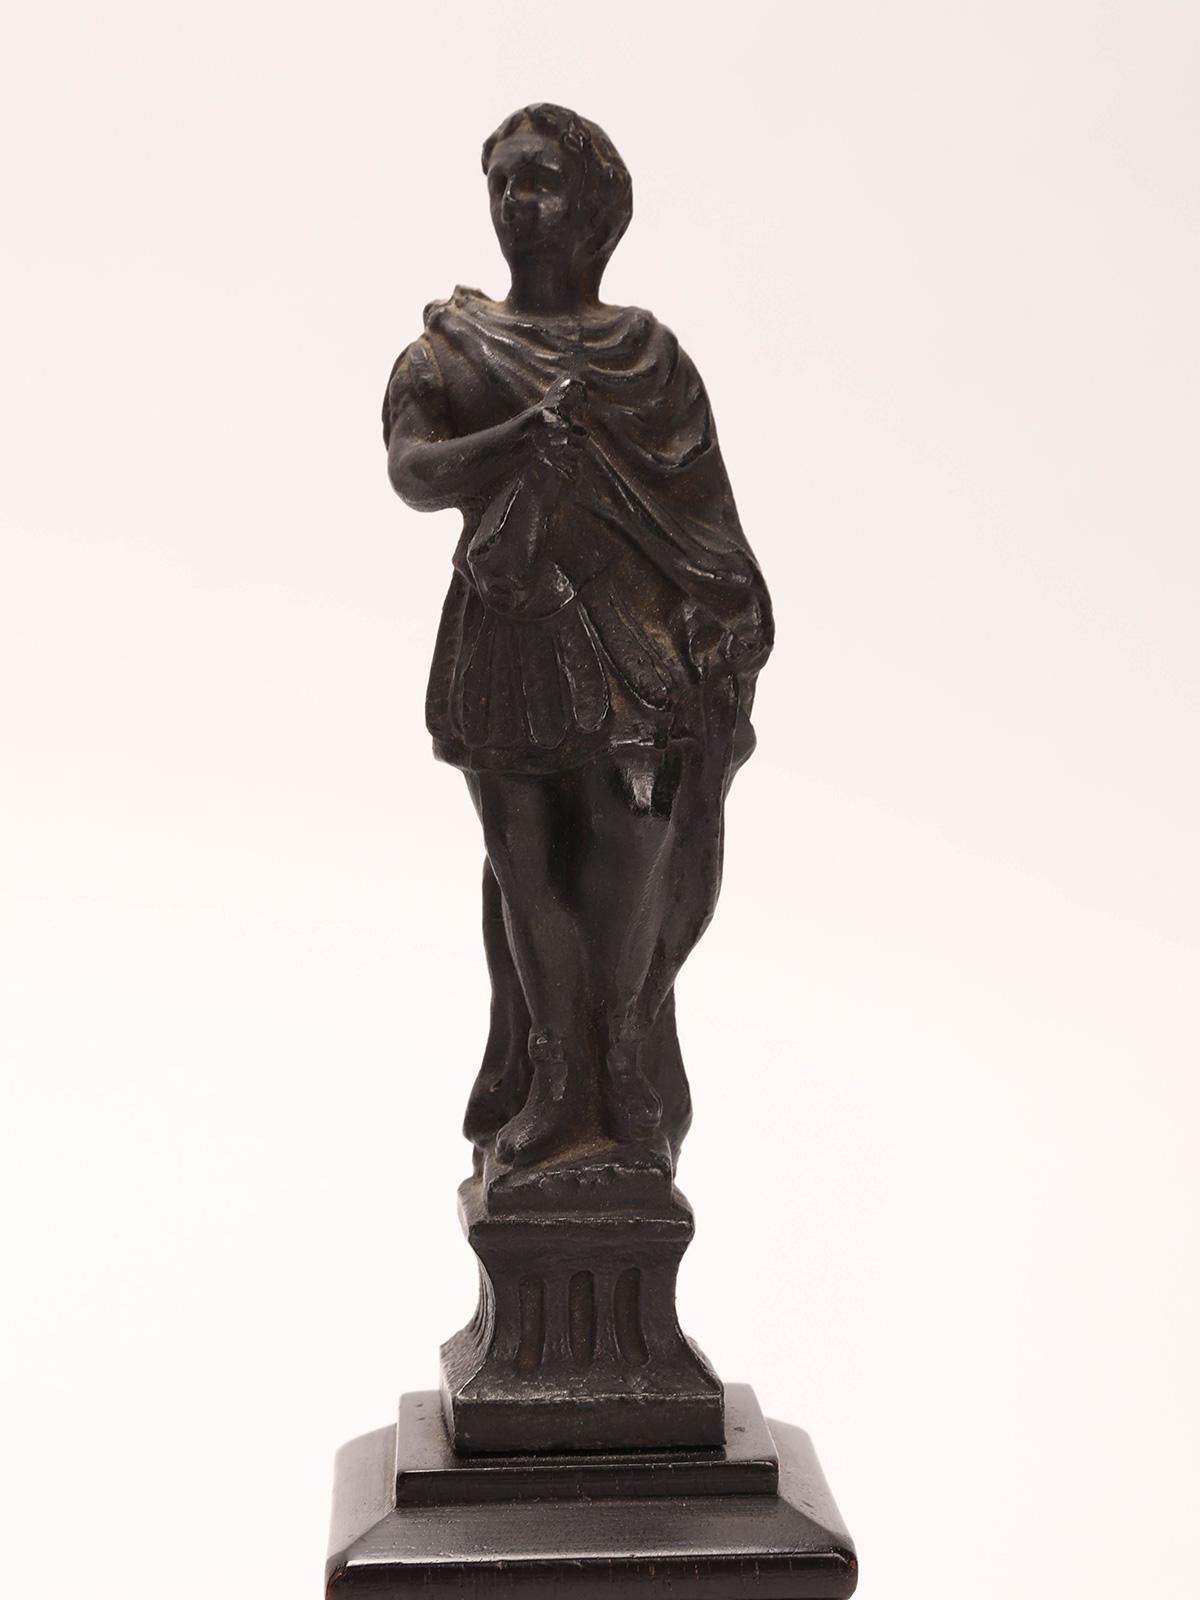 Italian Grand Tour: a pair of little white metal (bronze finishing patina) sculptures, depicting a figurine of a roman legislator and a roman warrior, mounted on ebony wooden bases. Venice, Italy 1880 ca.